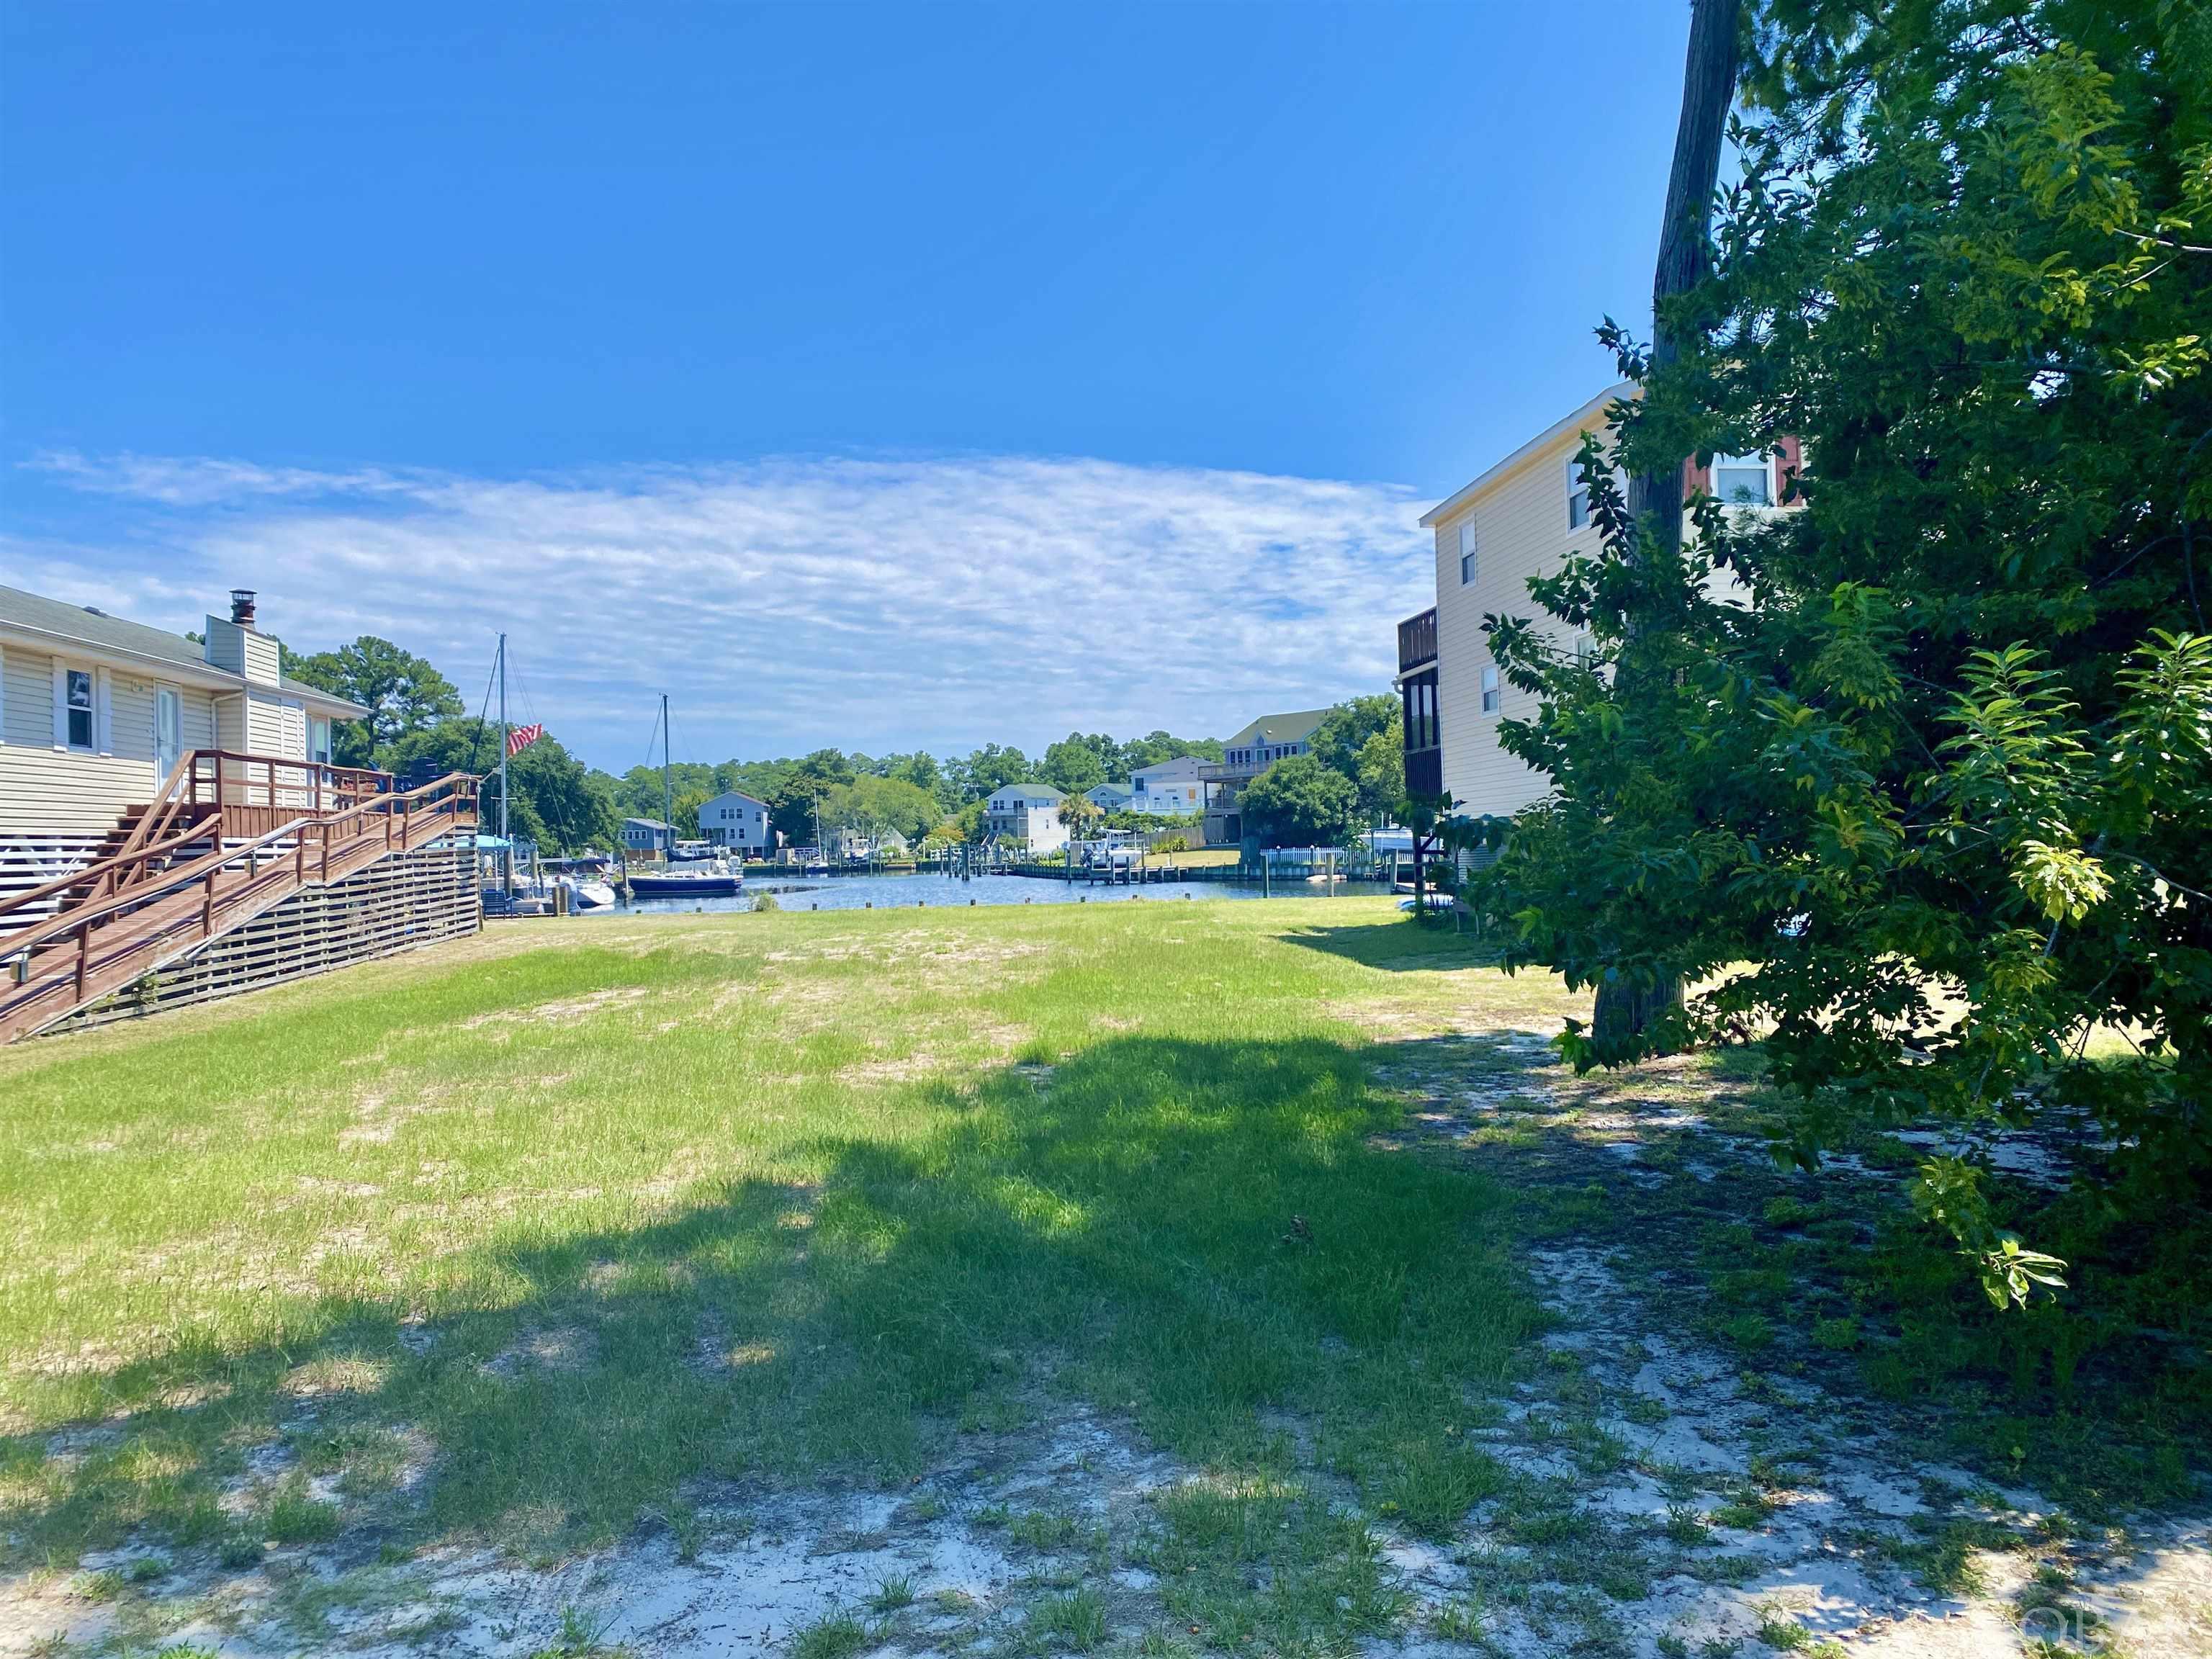 Located in the gated community of Colington Harbour, this is one of the last few Vacant Canalfront lots available. This property is already cleared  & level and ready for you to build your dream beach house. Beautiful expanded views as this lot has access to canals in three different directions.  Go Boating, Fishing, Swimming, Crabbing, Kayaking, SUP right off of your back yard.  Should have plenty of room for a pool,  boat lift & dock.  Colington Harbour offers a 24 hour security guard at the gate, a private beach, boat ramp, clubhouse, playground and picnic area. HOA fee is only $330 Per Year.  Join the Association pool for only around $200 per year.